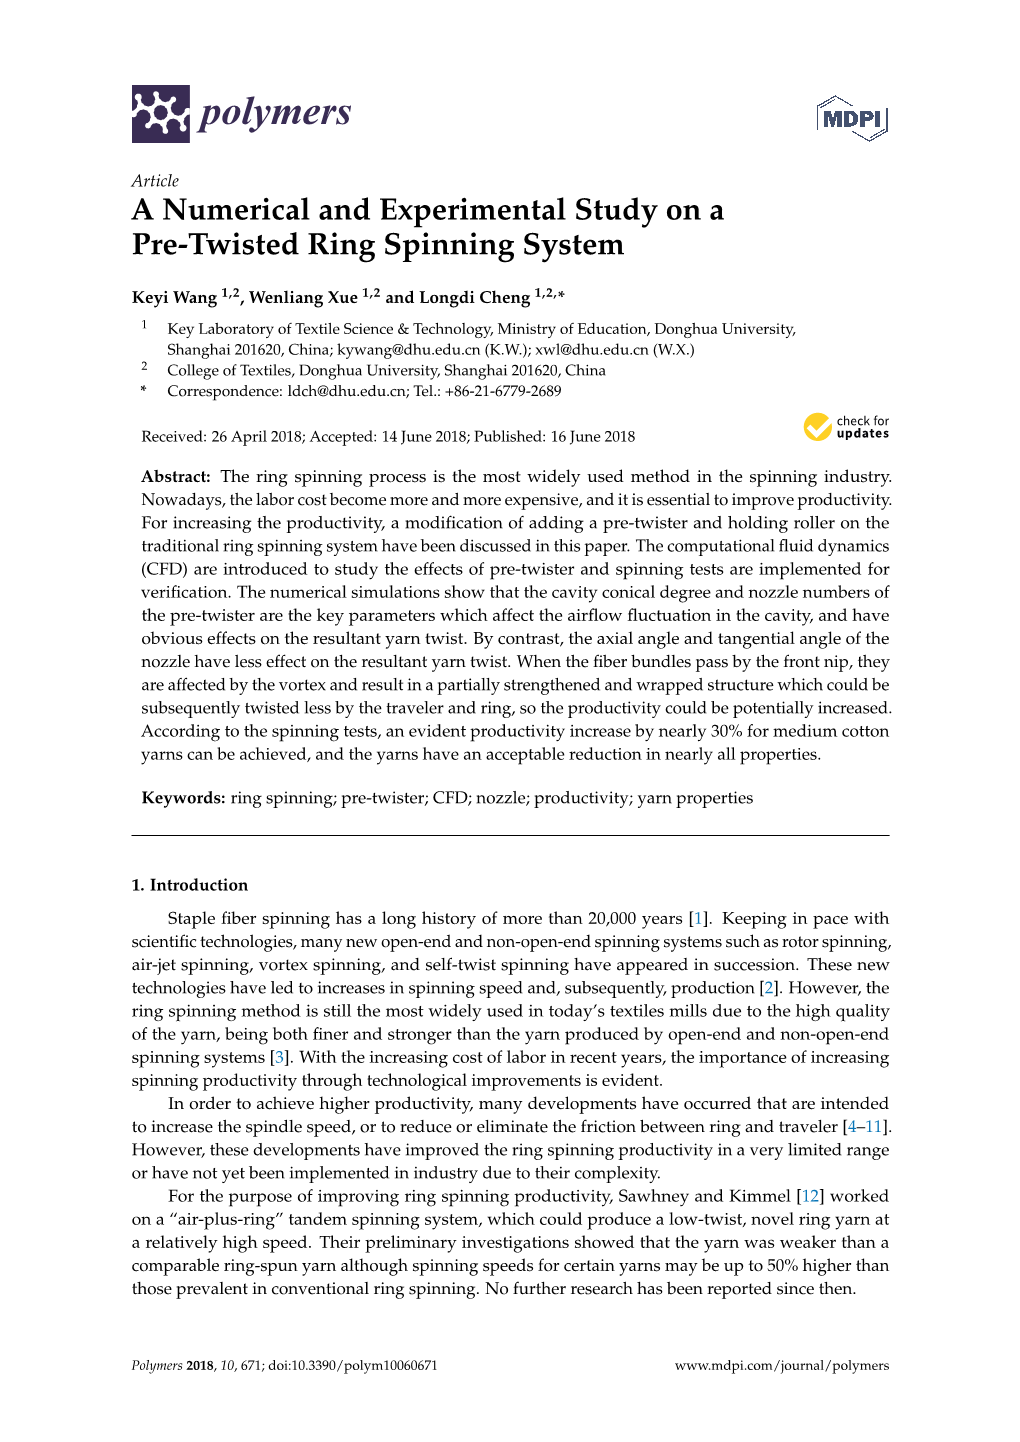 A Numerical and Experimental Study on a Pre-Twisted Ring Spinning System